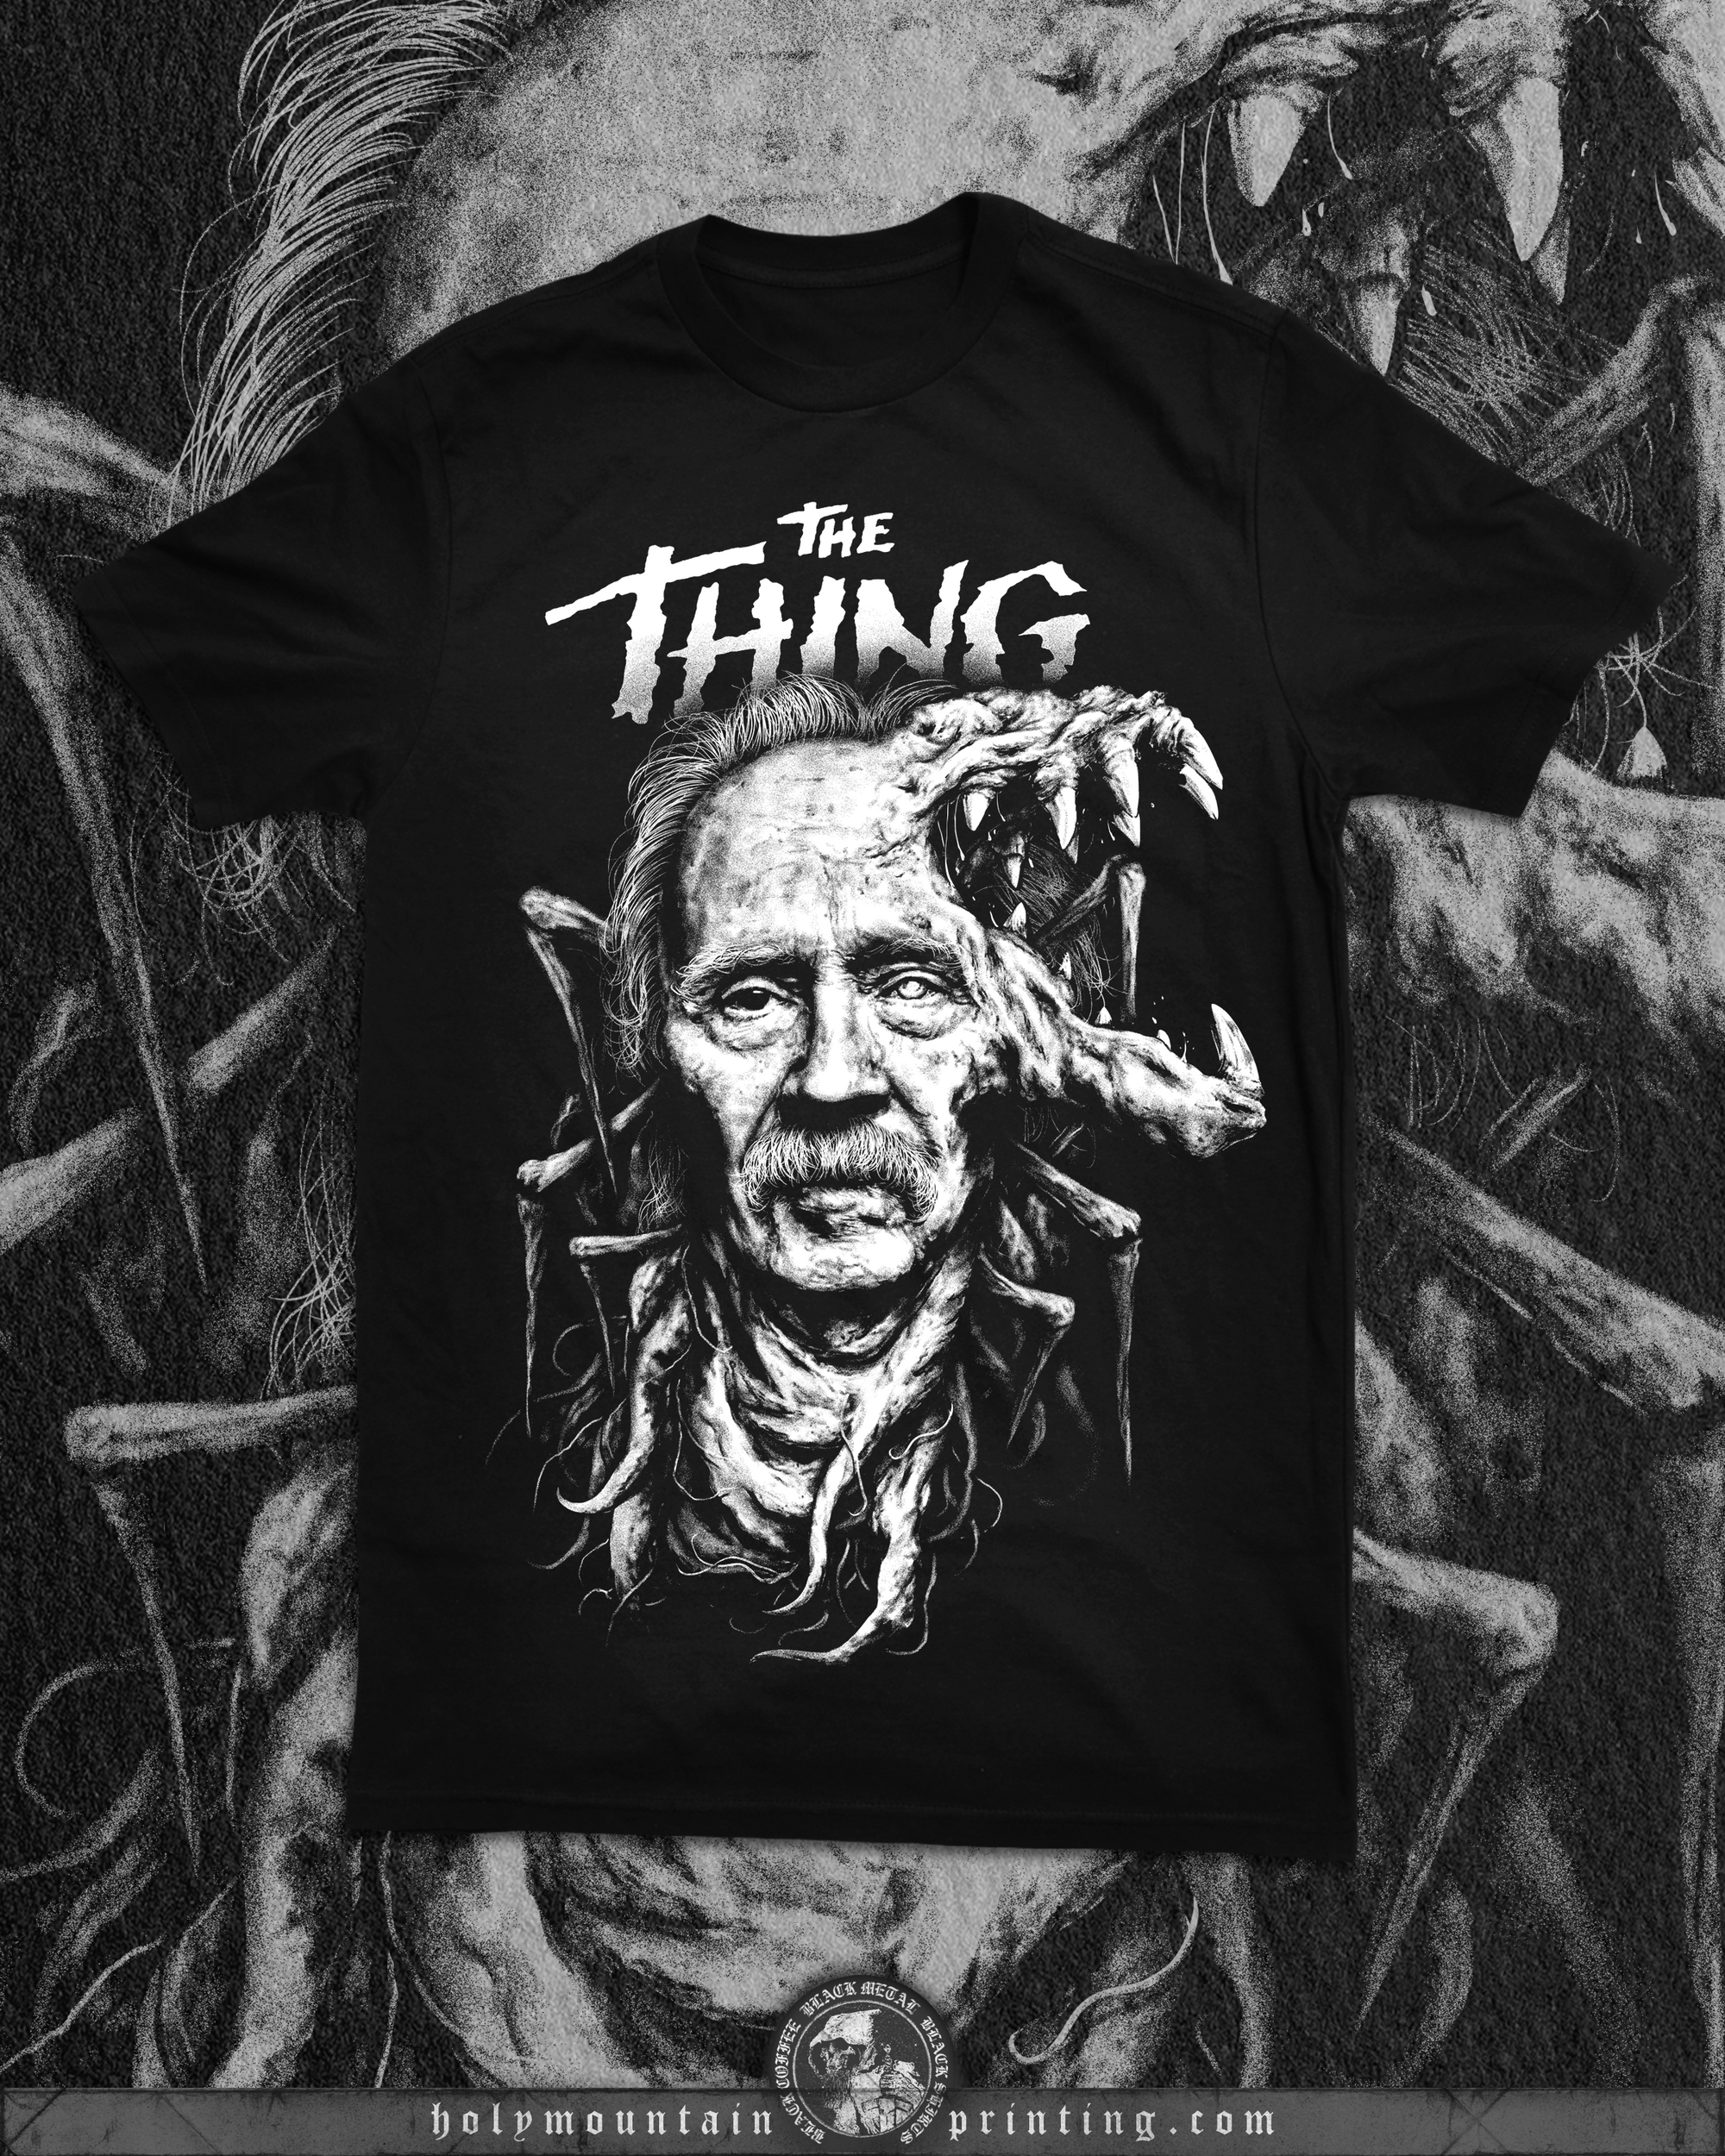 ABACROMBIE INK "THE THING" SHIRT